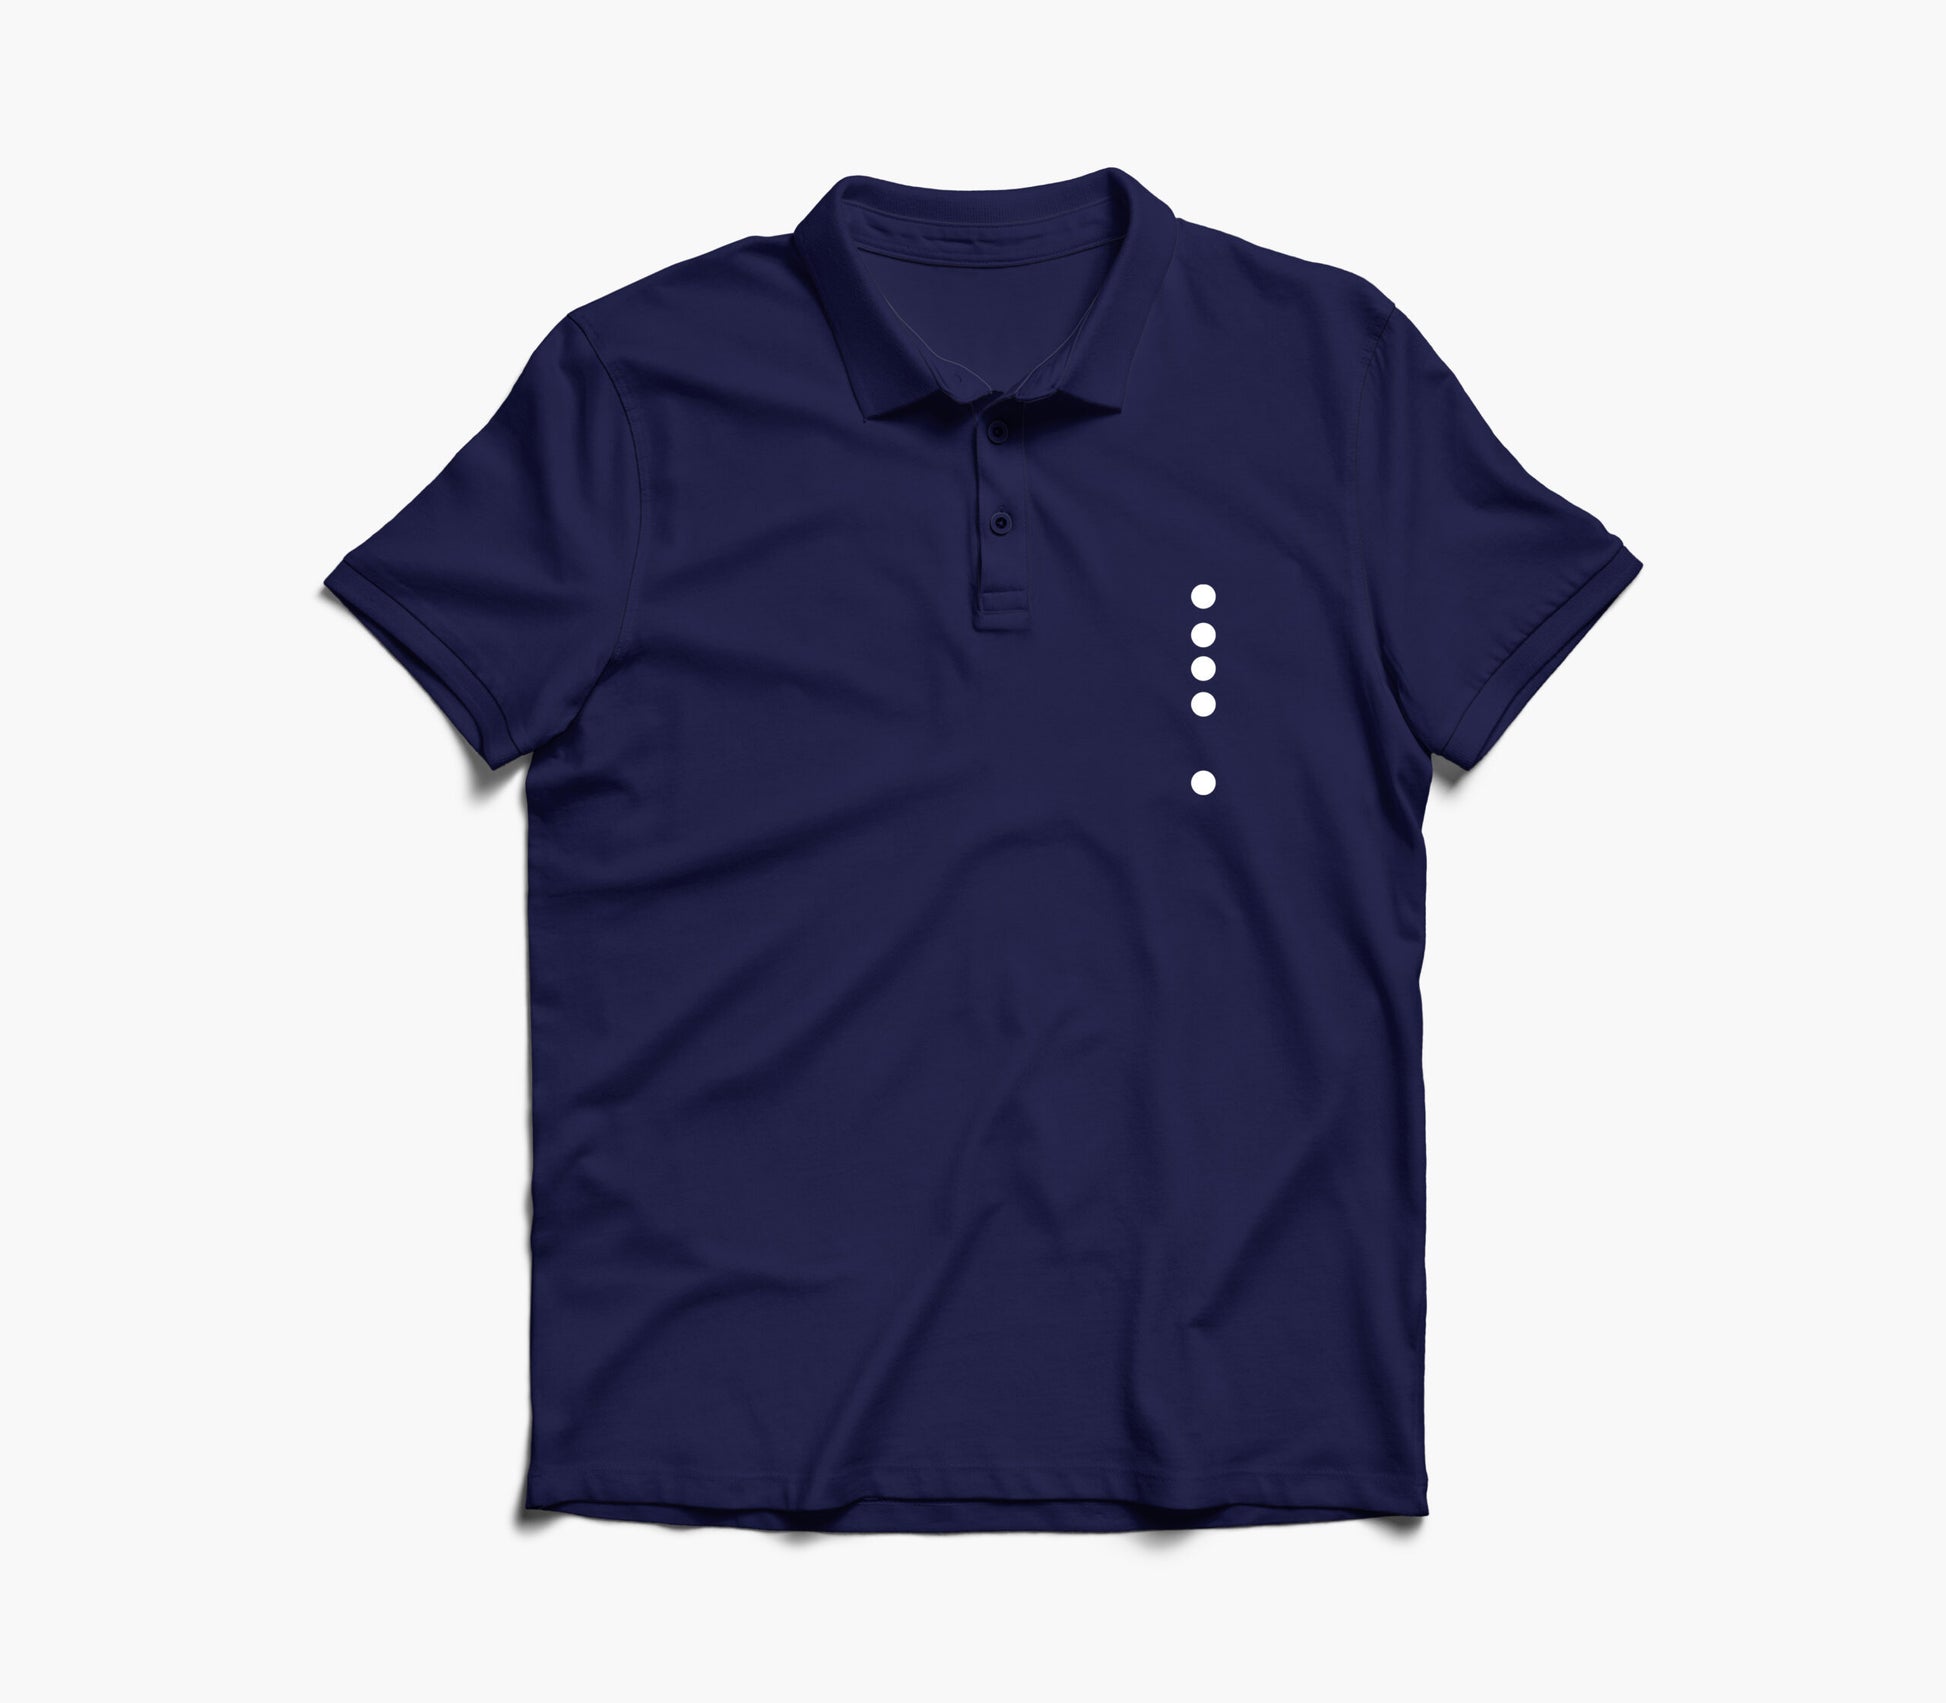 Four Dots Graphic Polo Shirt